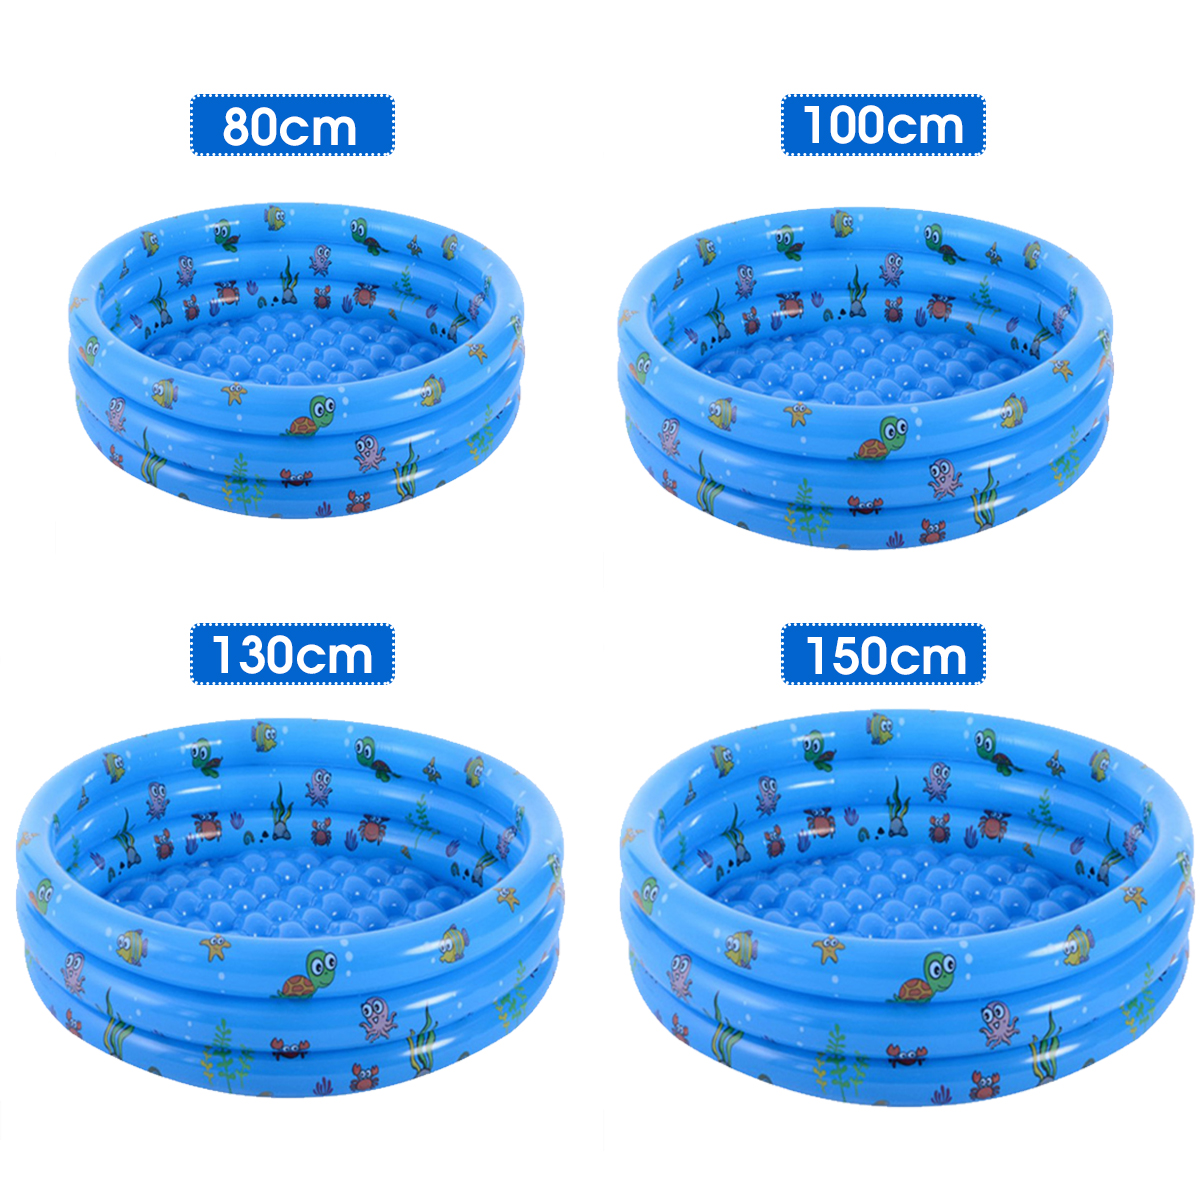 130150CM-Swimming-Pool-Childrens-Baby-Paddling-Pool-Round-Bubble-Bottom-Inflatable-Pool-with-Air-Pum-1815393-6